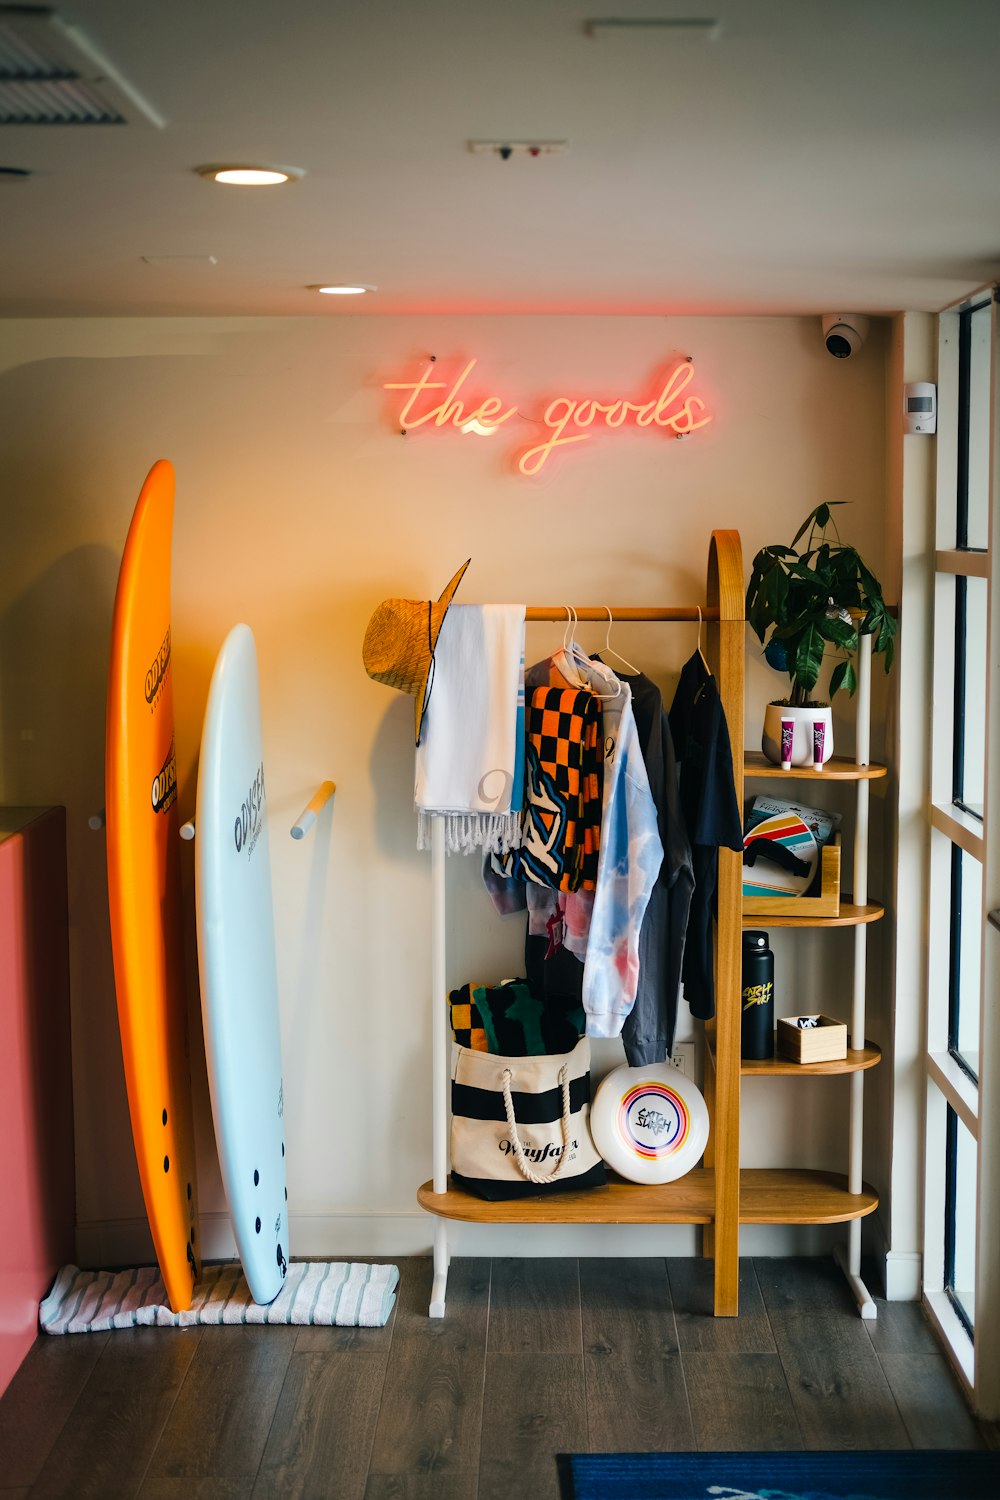 a surfboard and a surfboard rack in a room